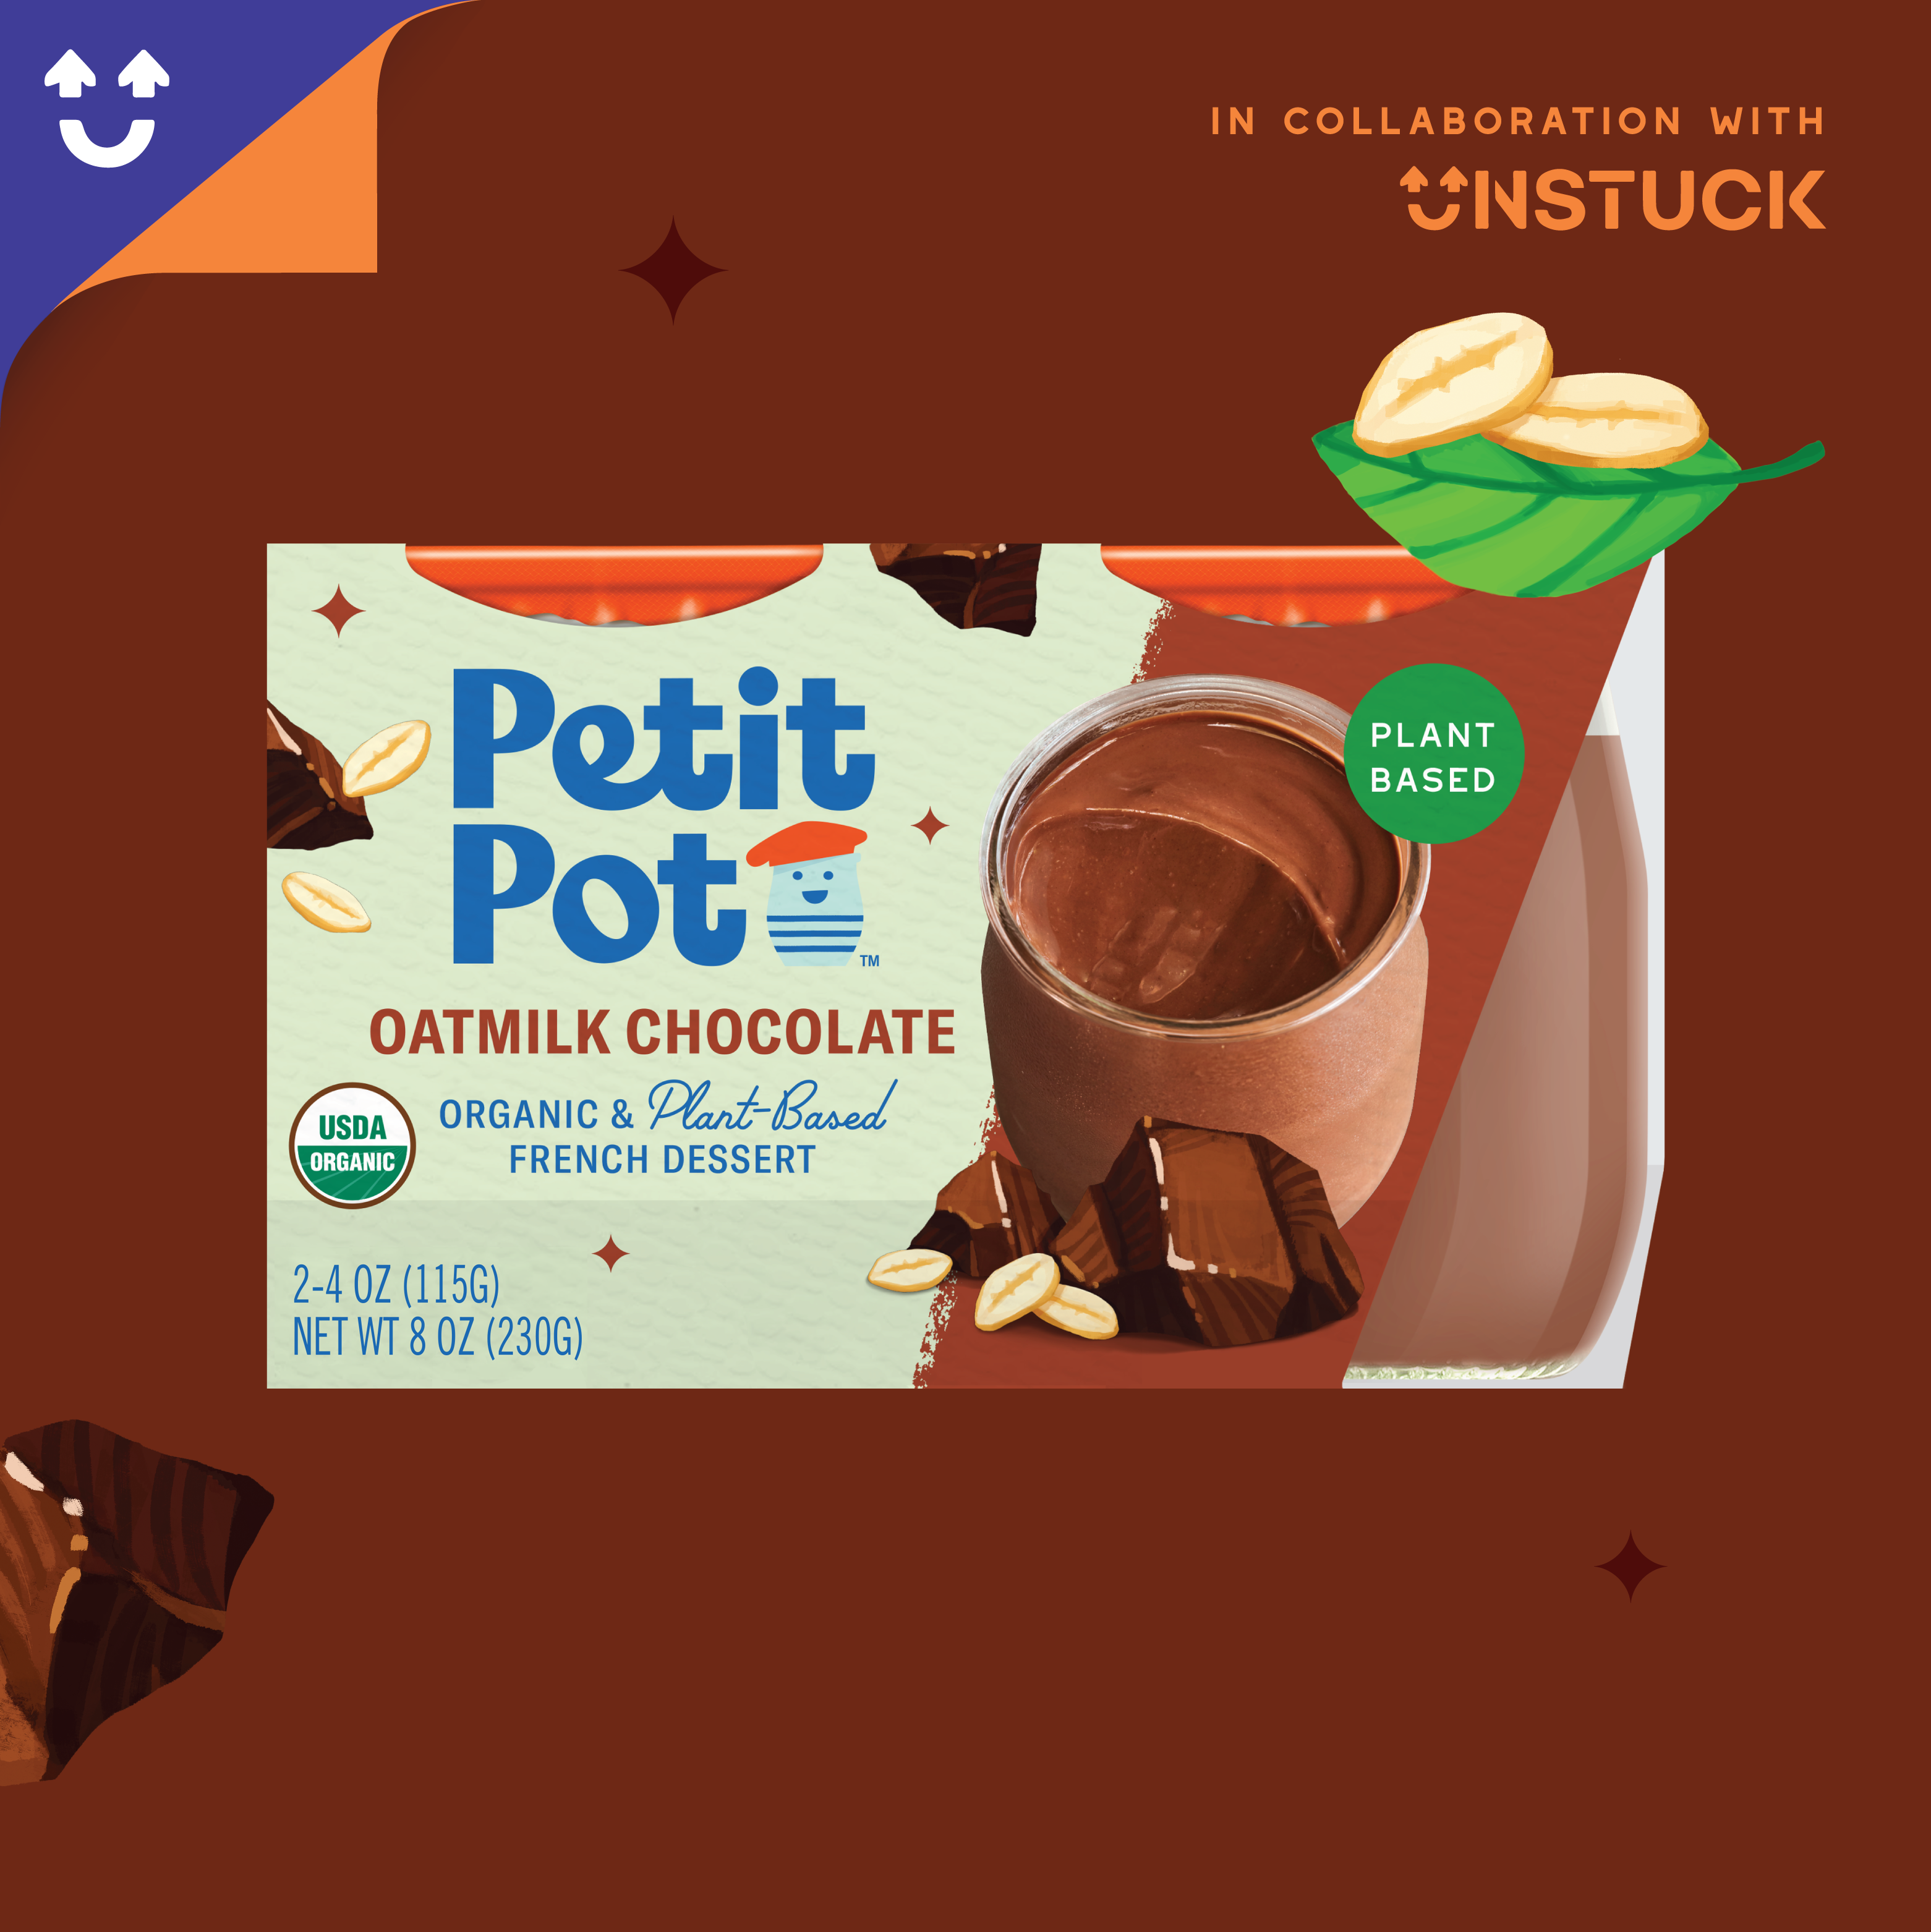 Petit Pots New Look, Lower Price, and USDA Organic Certification